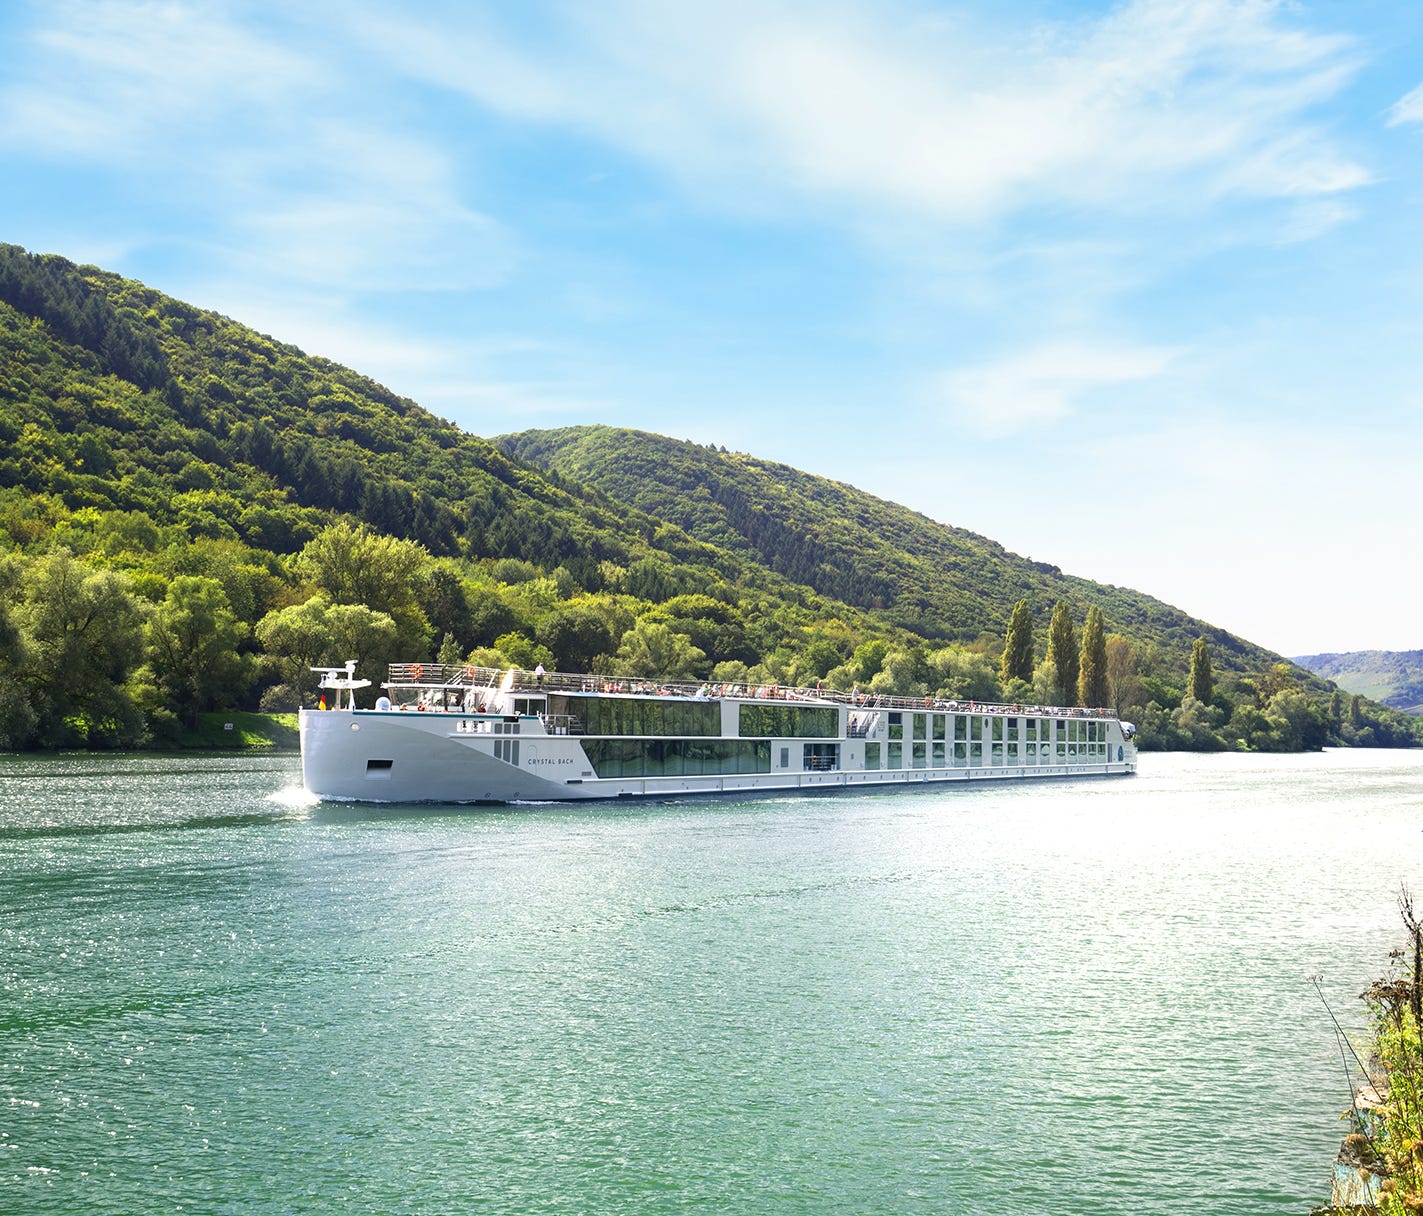 Crystal Cruises has launched four upscale river ships in Europe since late 2017 as part of a rapid move into river cruising.